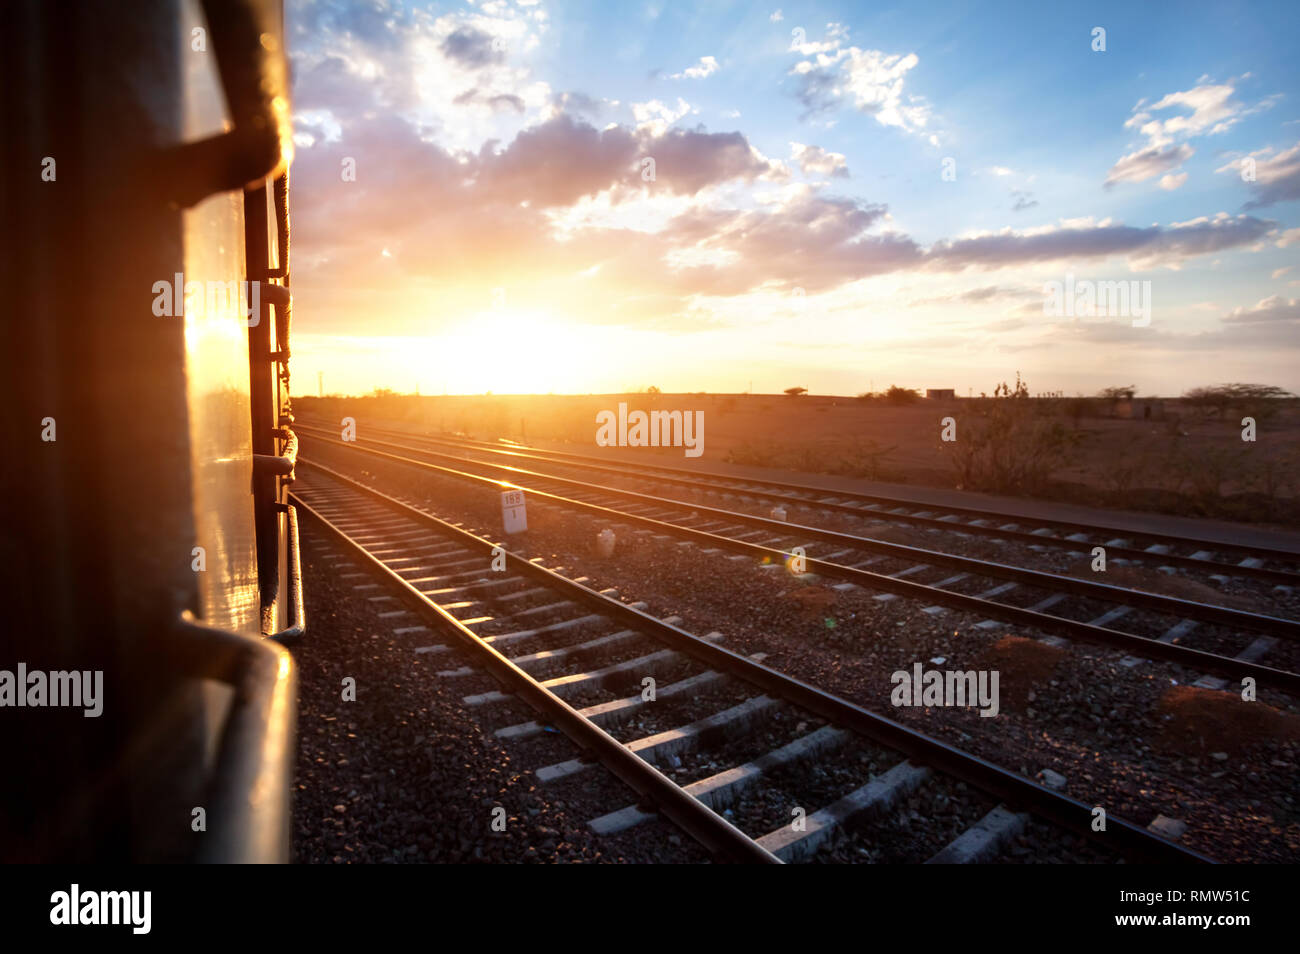 Train passing desert area at sunset sky beckgroung in Rajasthan, India Stock Photo